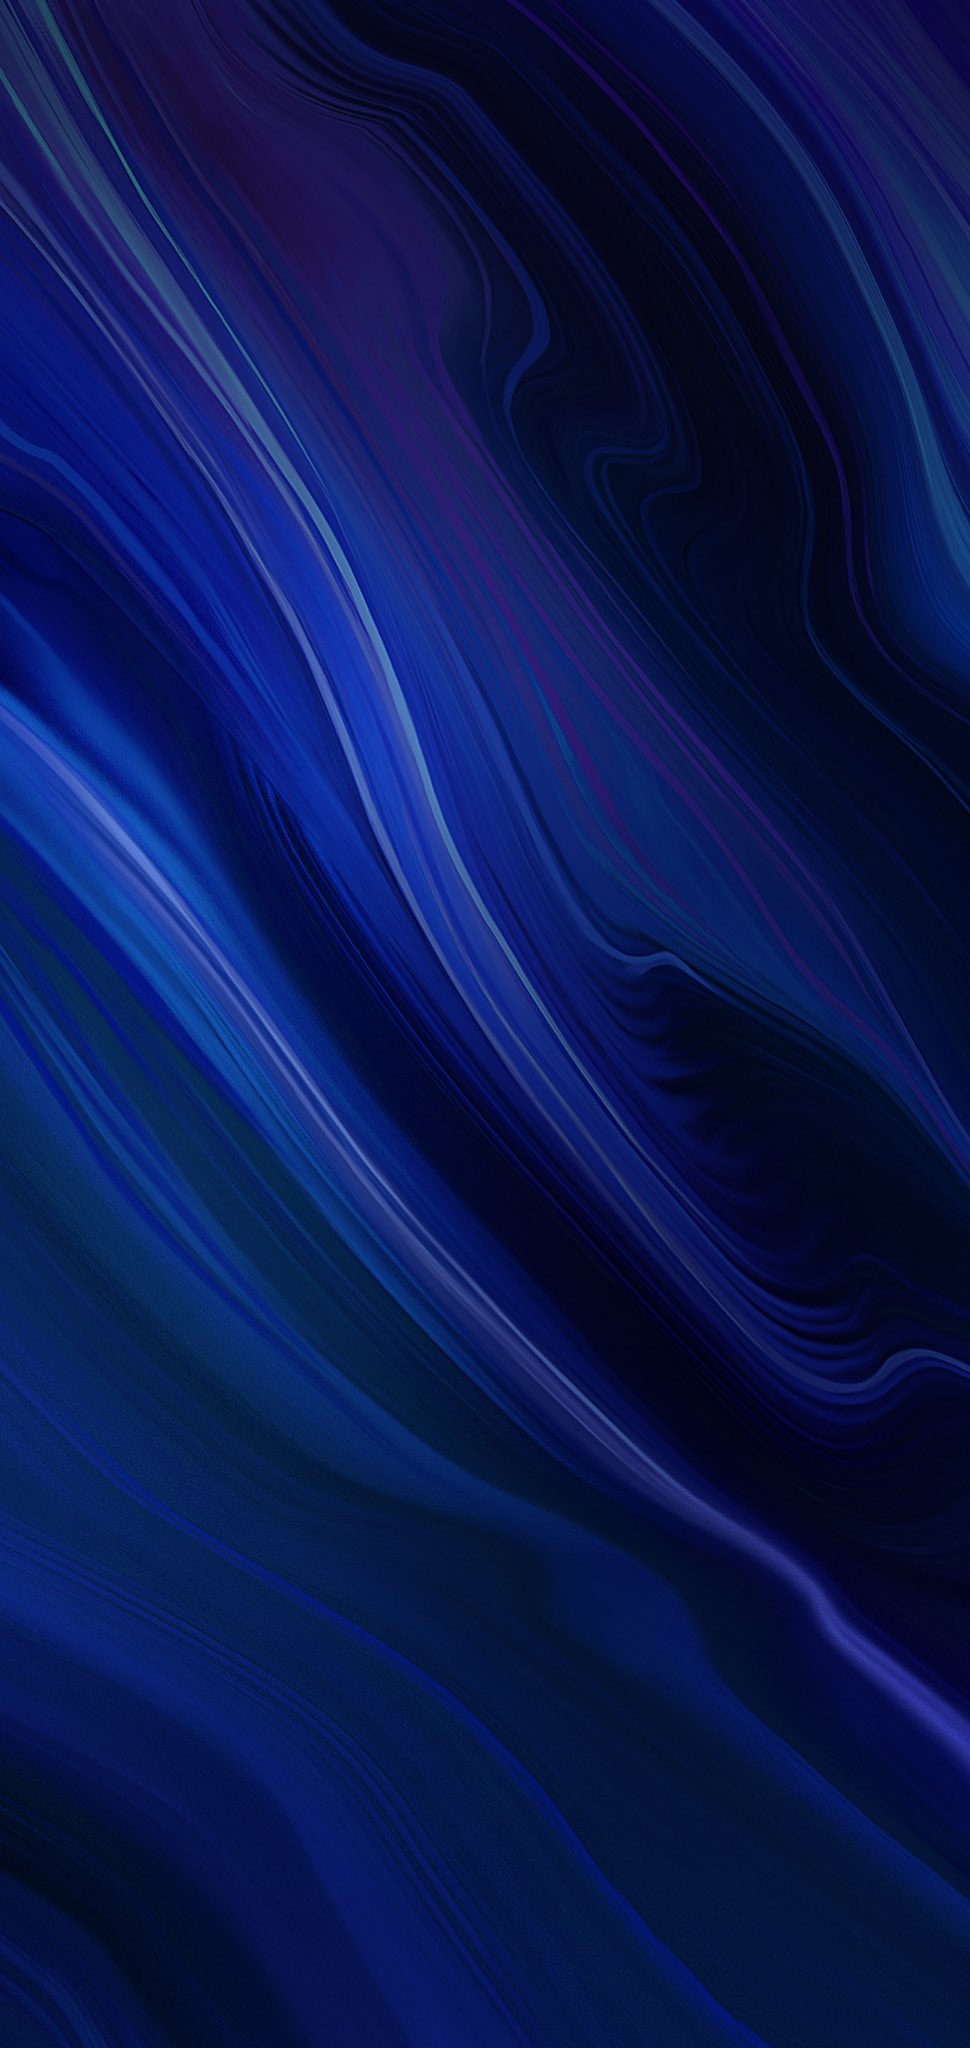 Blue wallpapers for iPhone 12, iPhone 12 Pro, iPad, and Mac